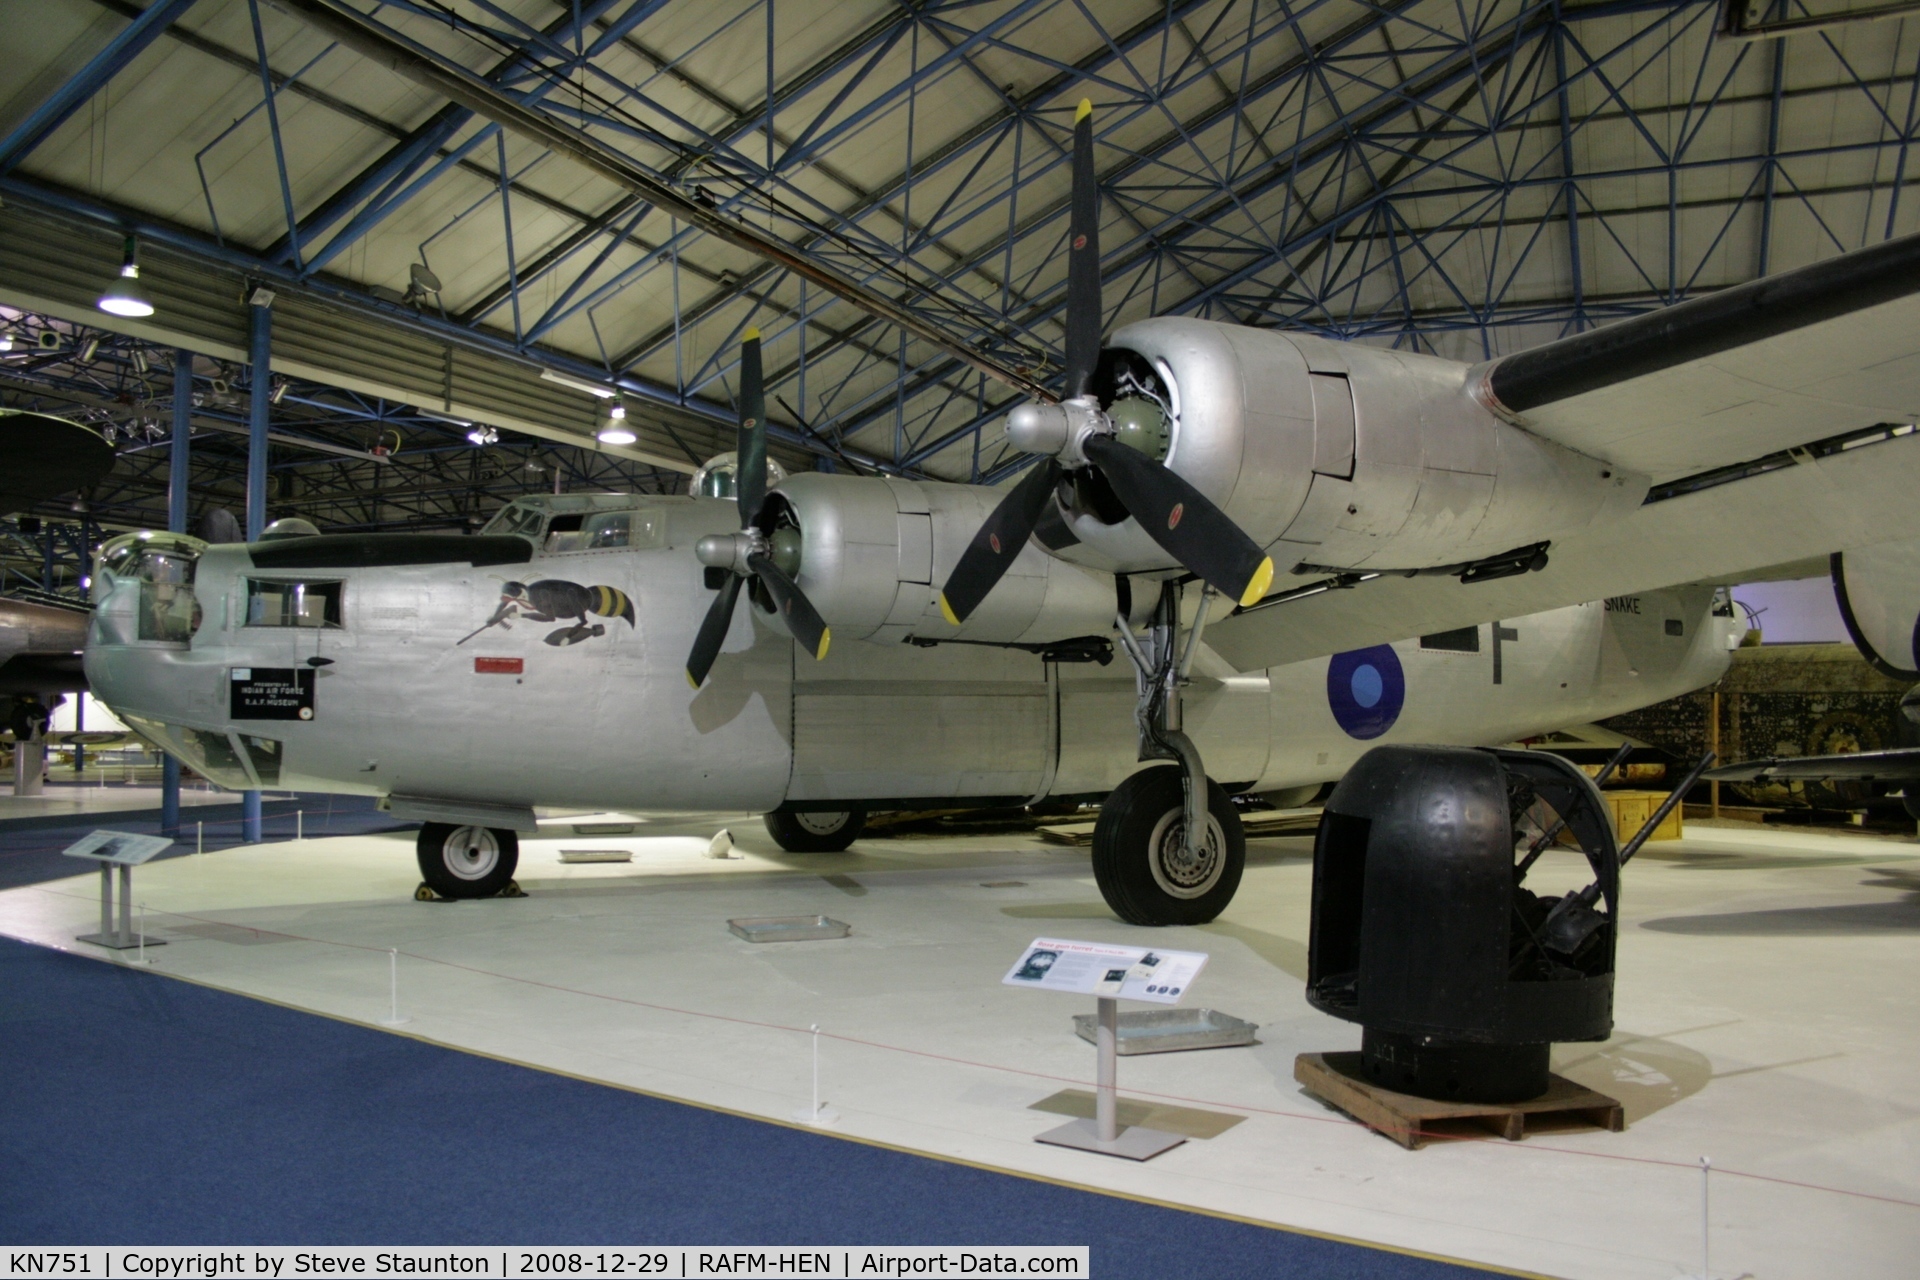 KN751, Consolidated B-24 Liberator C/N 6707L, Taken at the RAF Museum, Hendon. December 2008